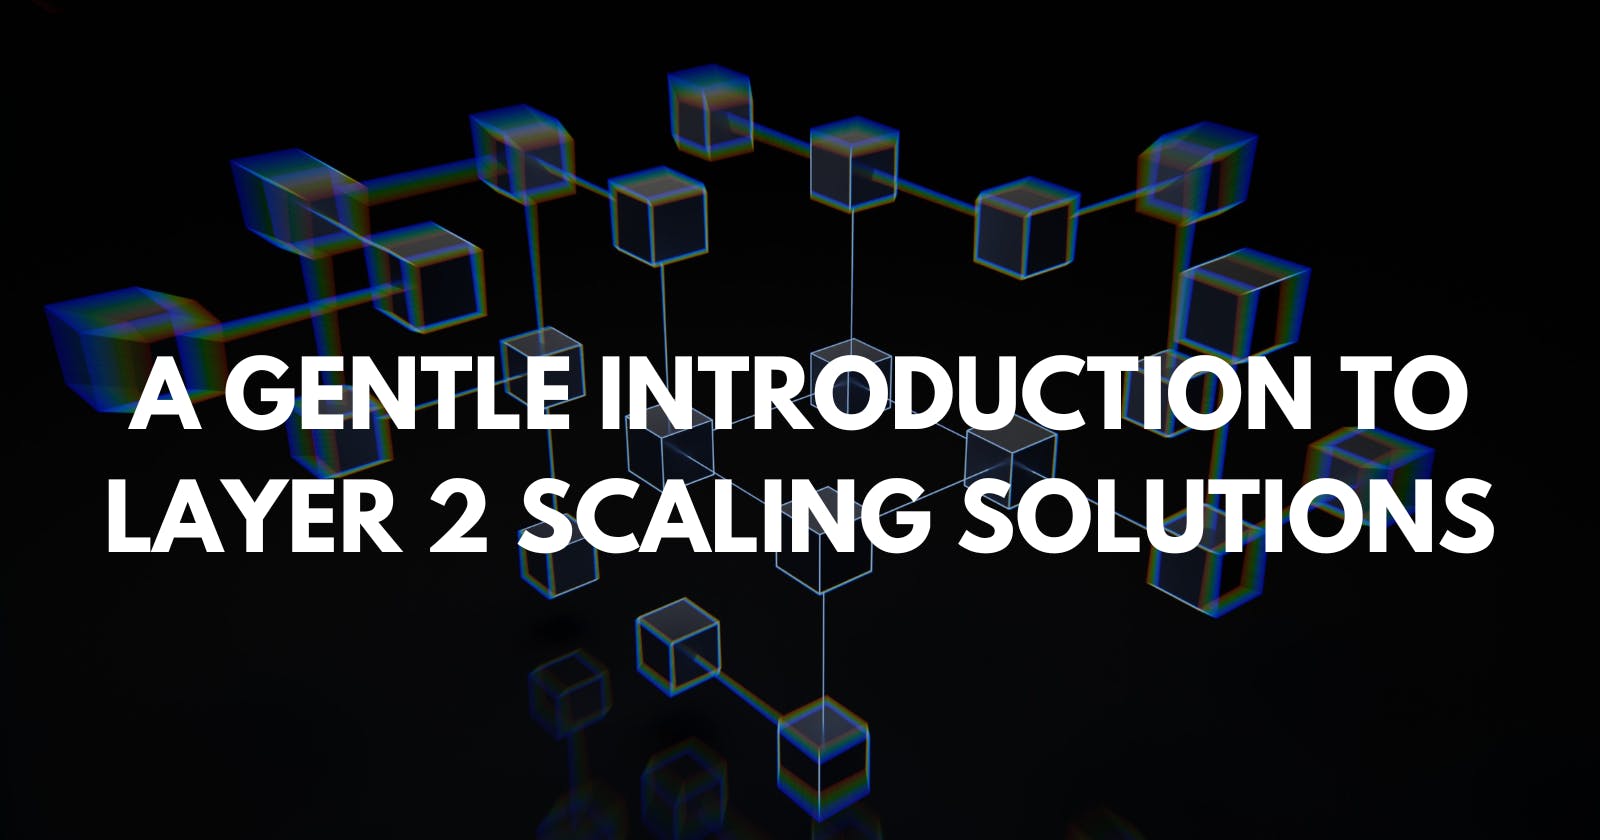 A Gentle Introduction to Layer 2 Scaling Solutions